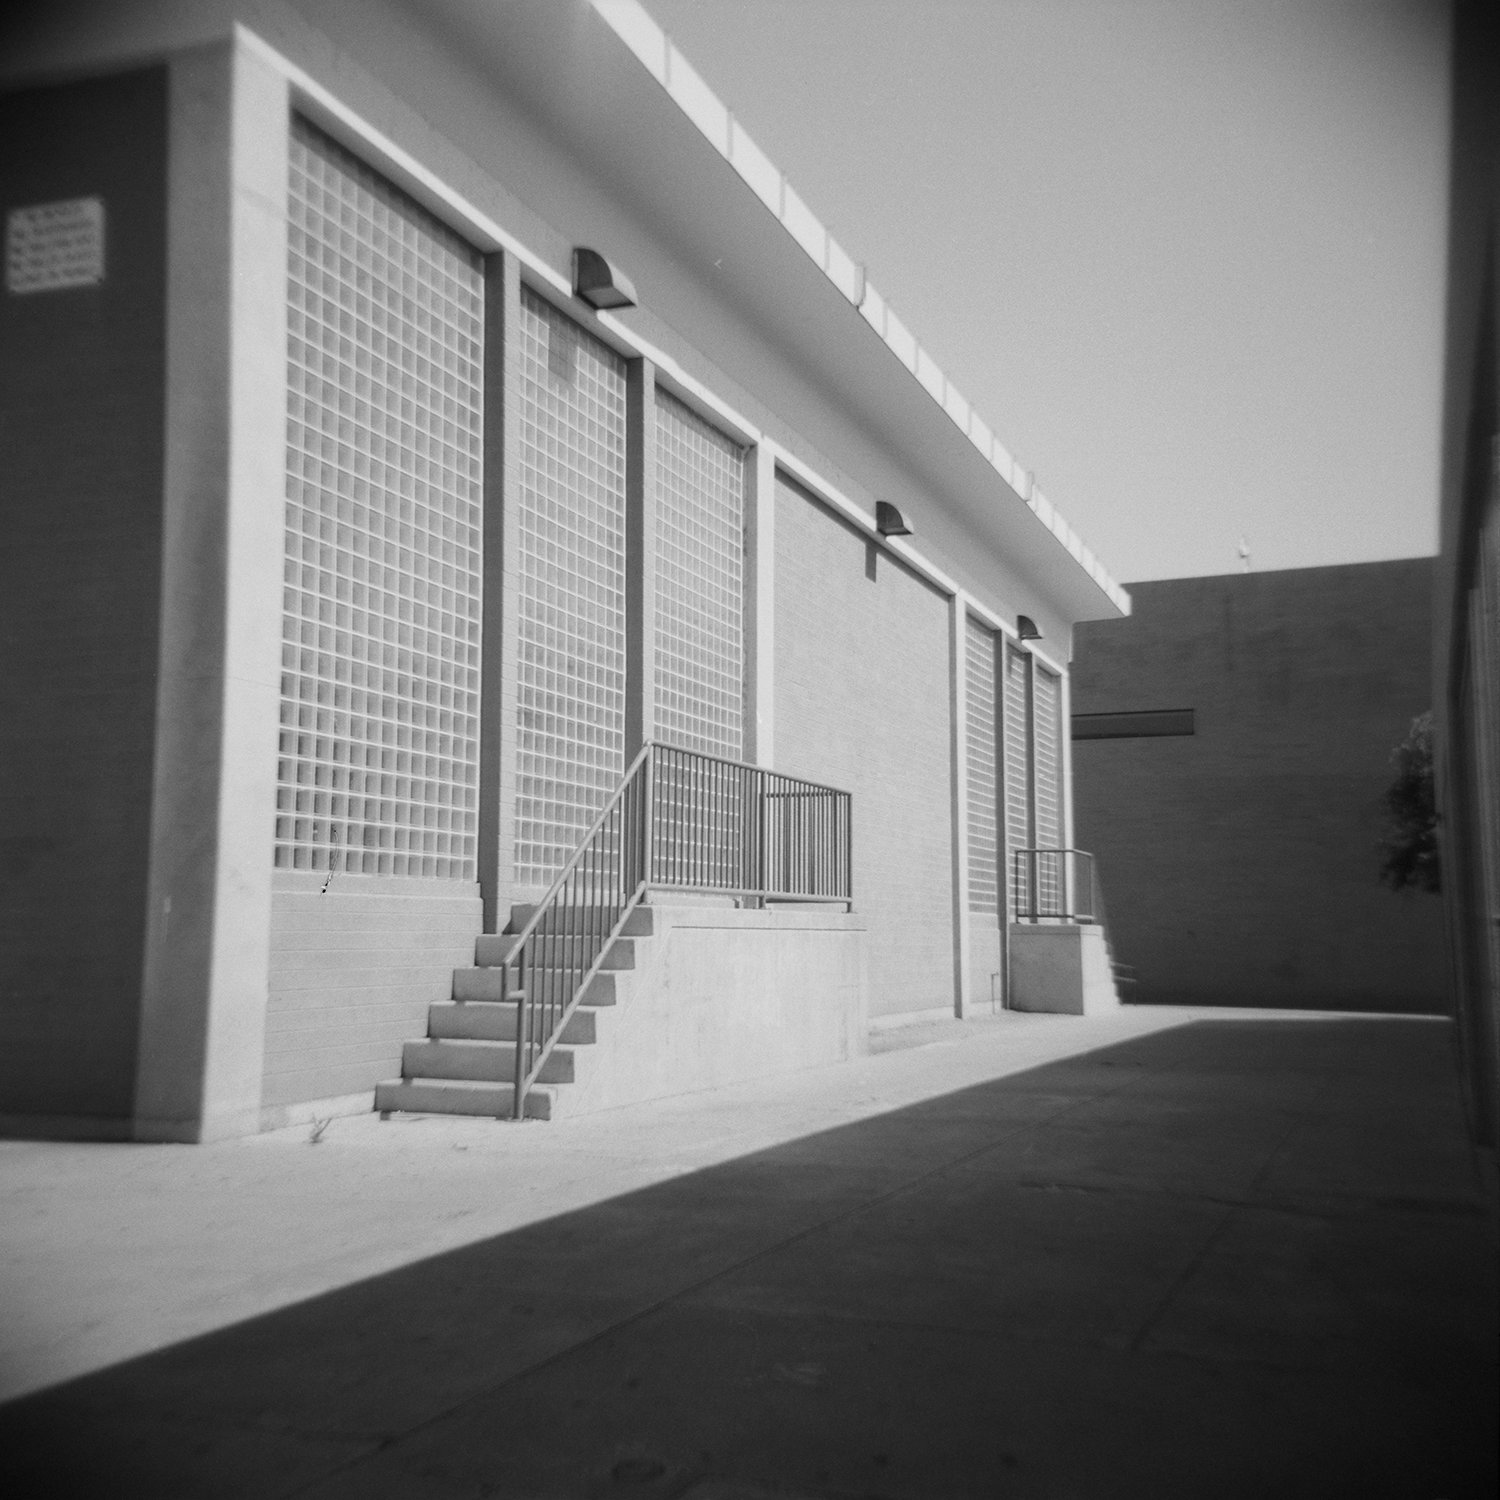 Where is Home? (Paradise Valley High School: Cafeteria / Where I Ate Lunch) by Aaron Wilder